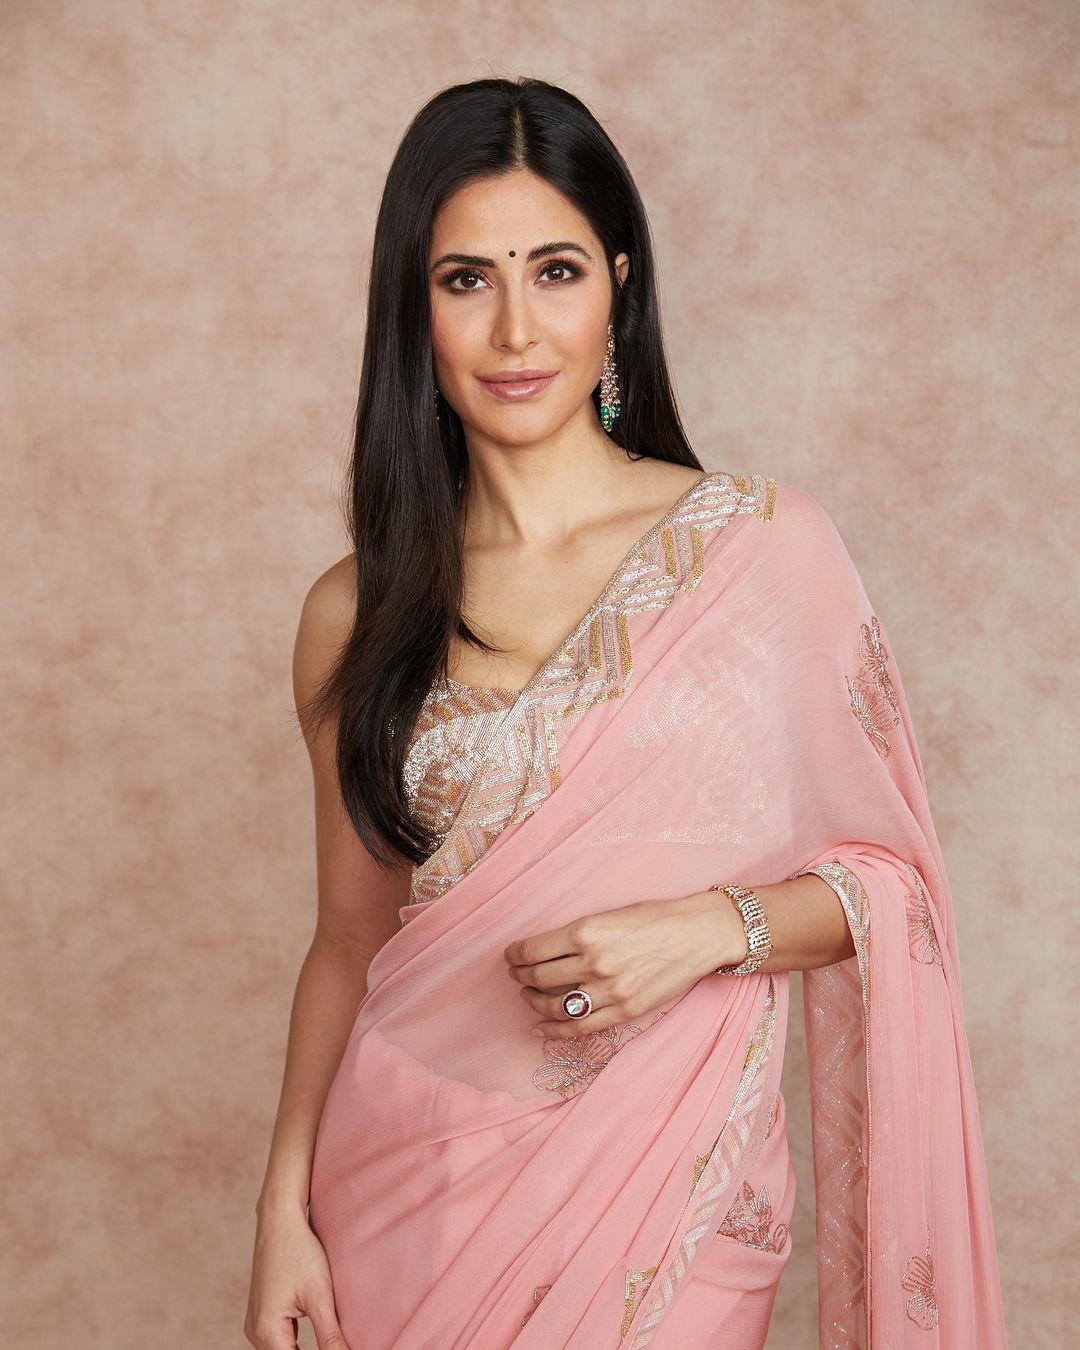 Making a case for desi glamour, Katrina opted for a soft pink saree by Manish Malhotra for her Diwali celebration.